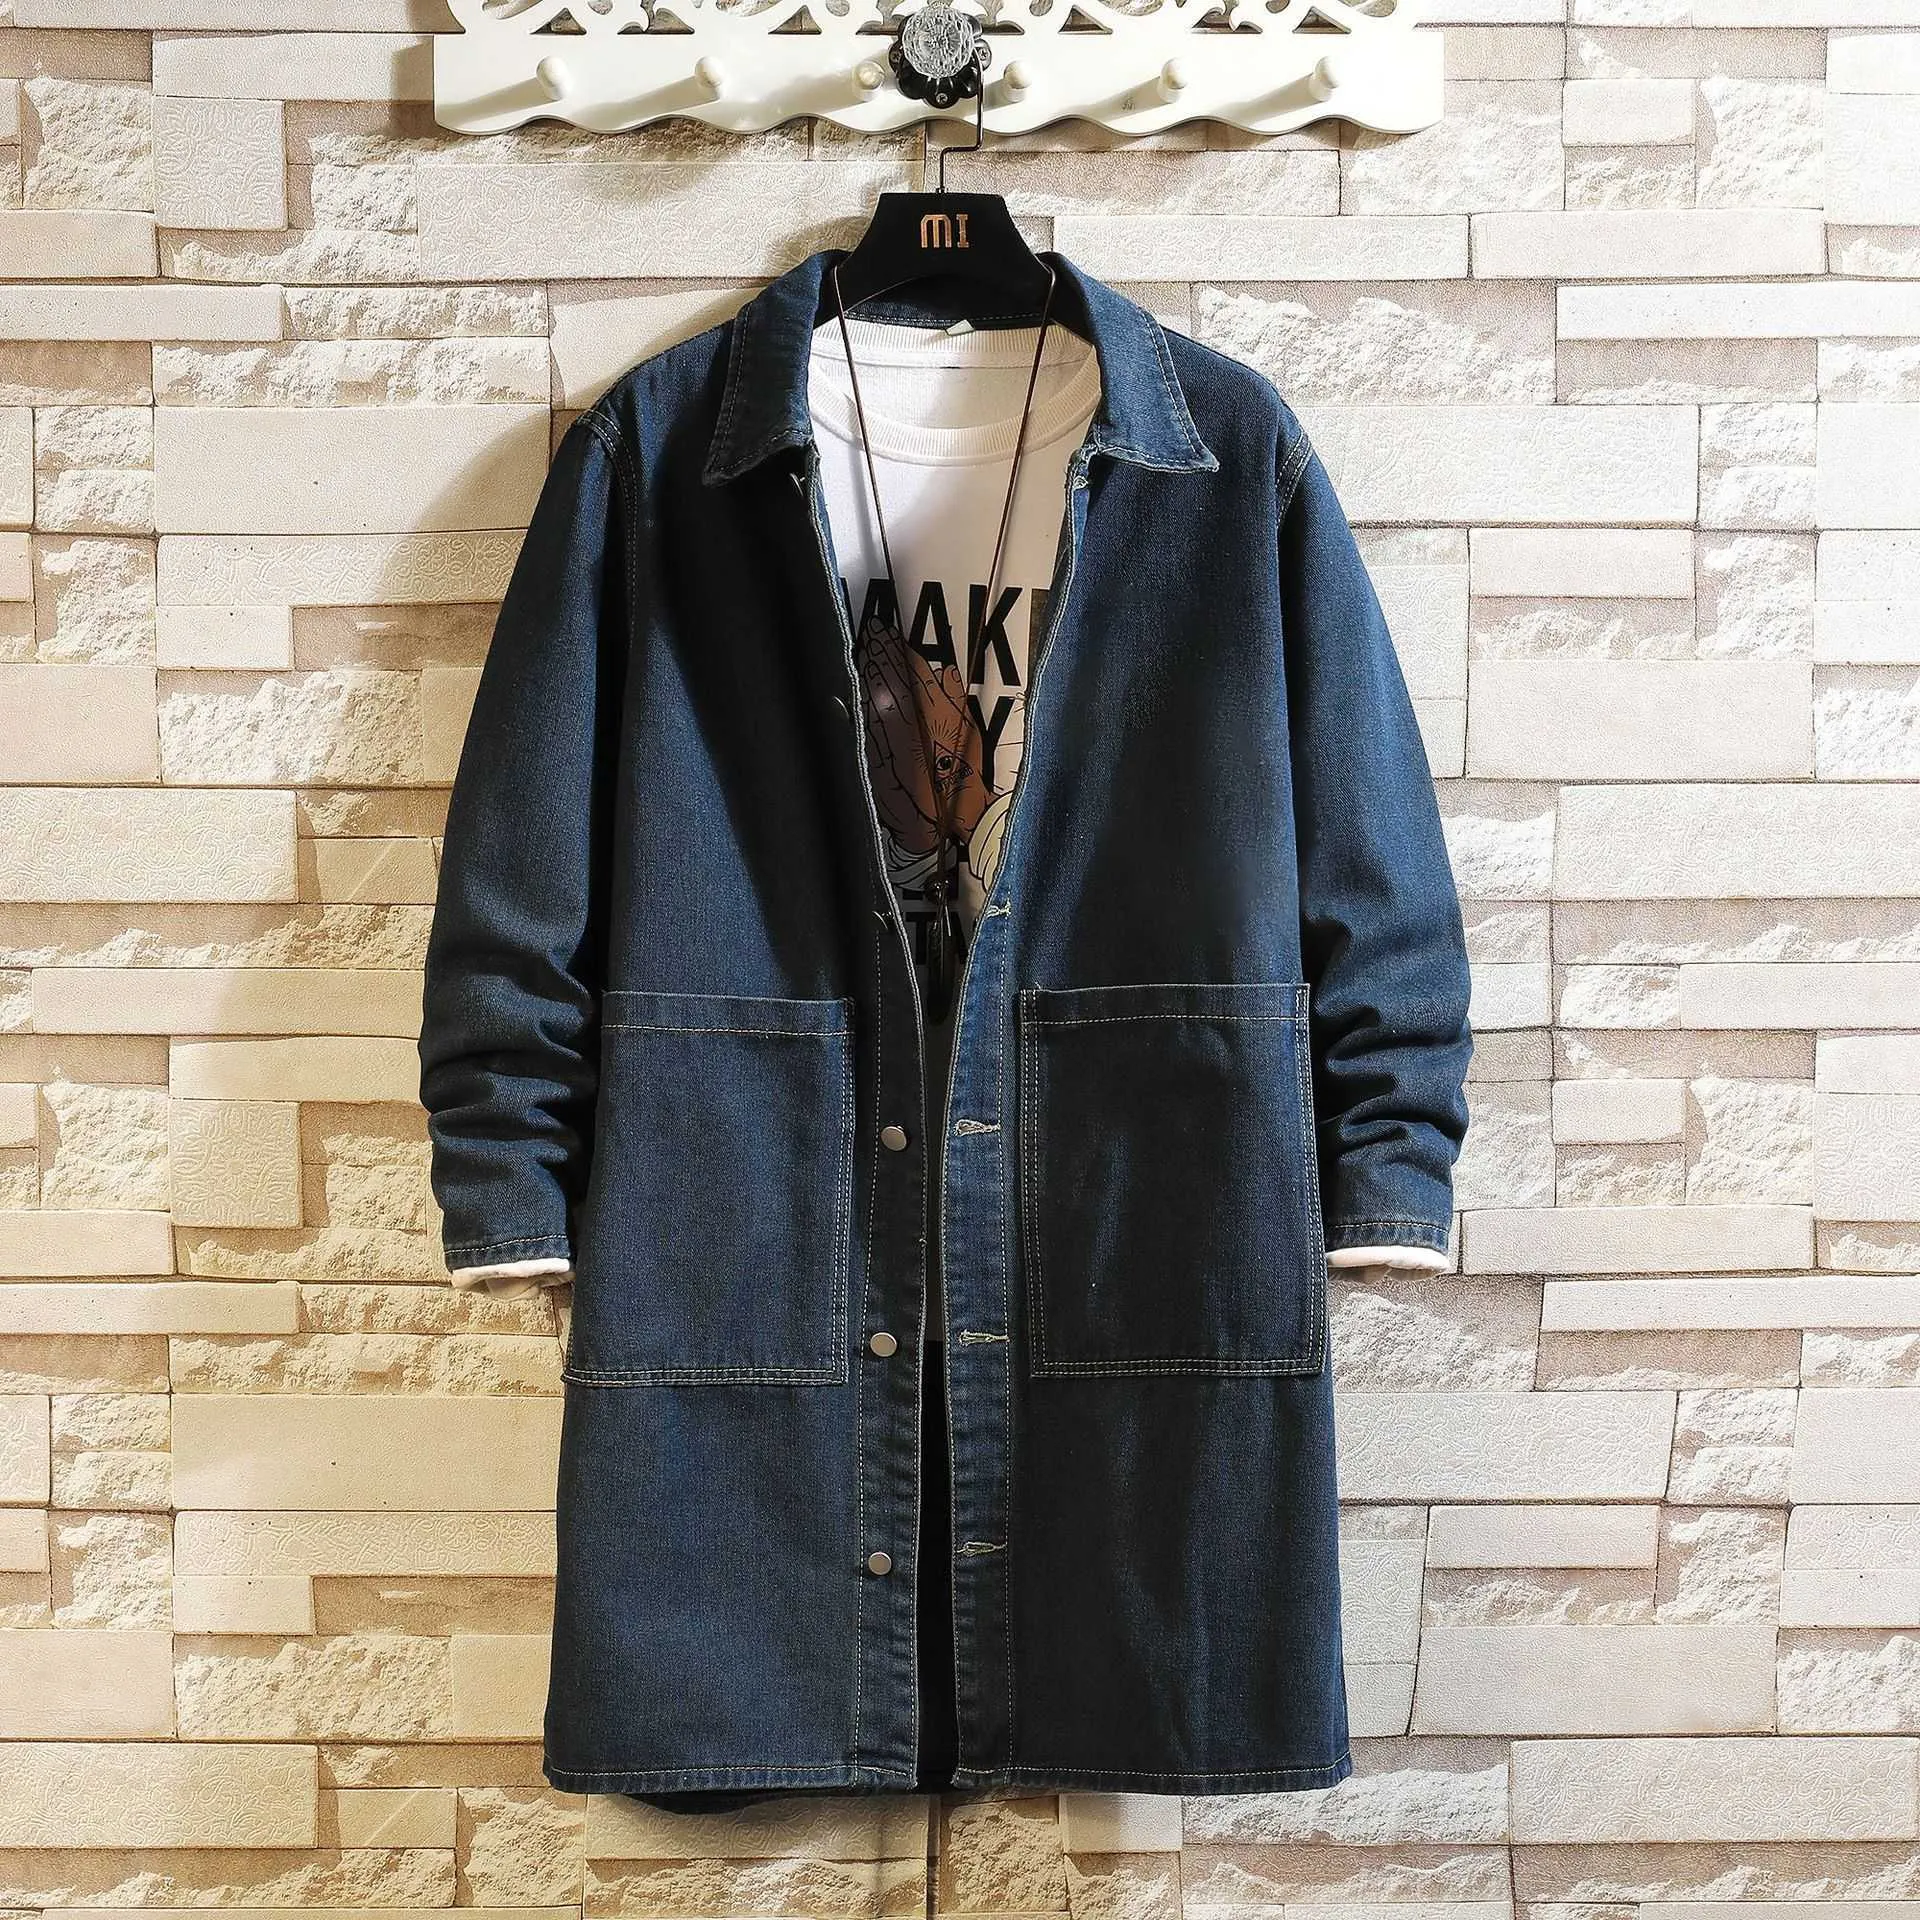 Autumn Spring Men Denim Trench Coat Male Fashion Casual Loose Jean Long  Windbreaker Jacket Mens Overcoat From Southj, $74.64 | DHgate.Com